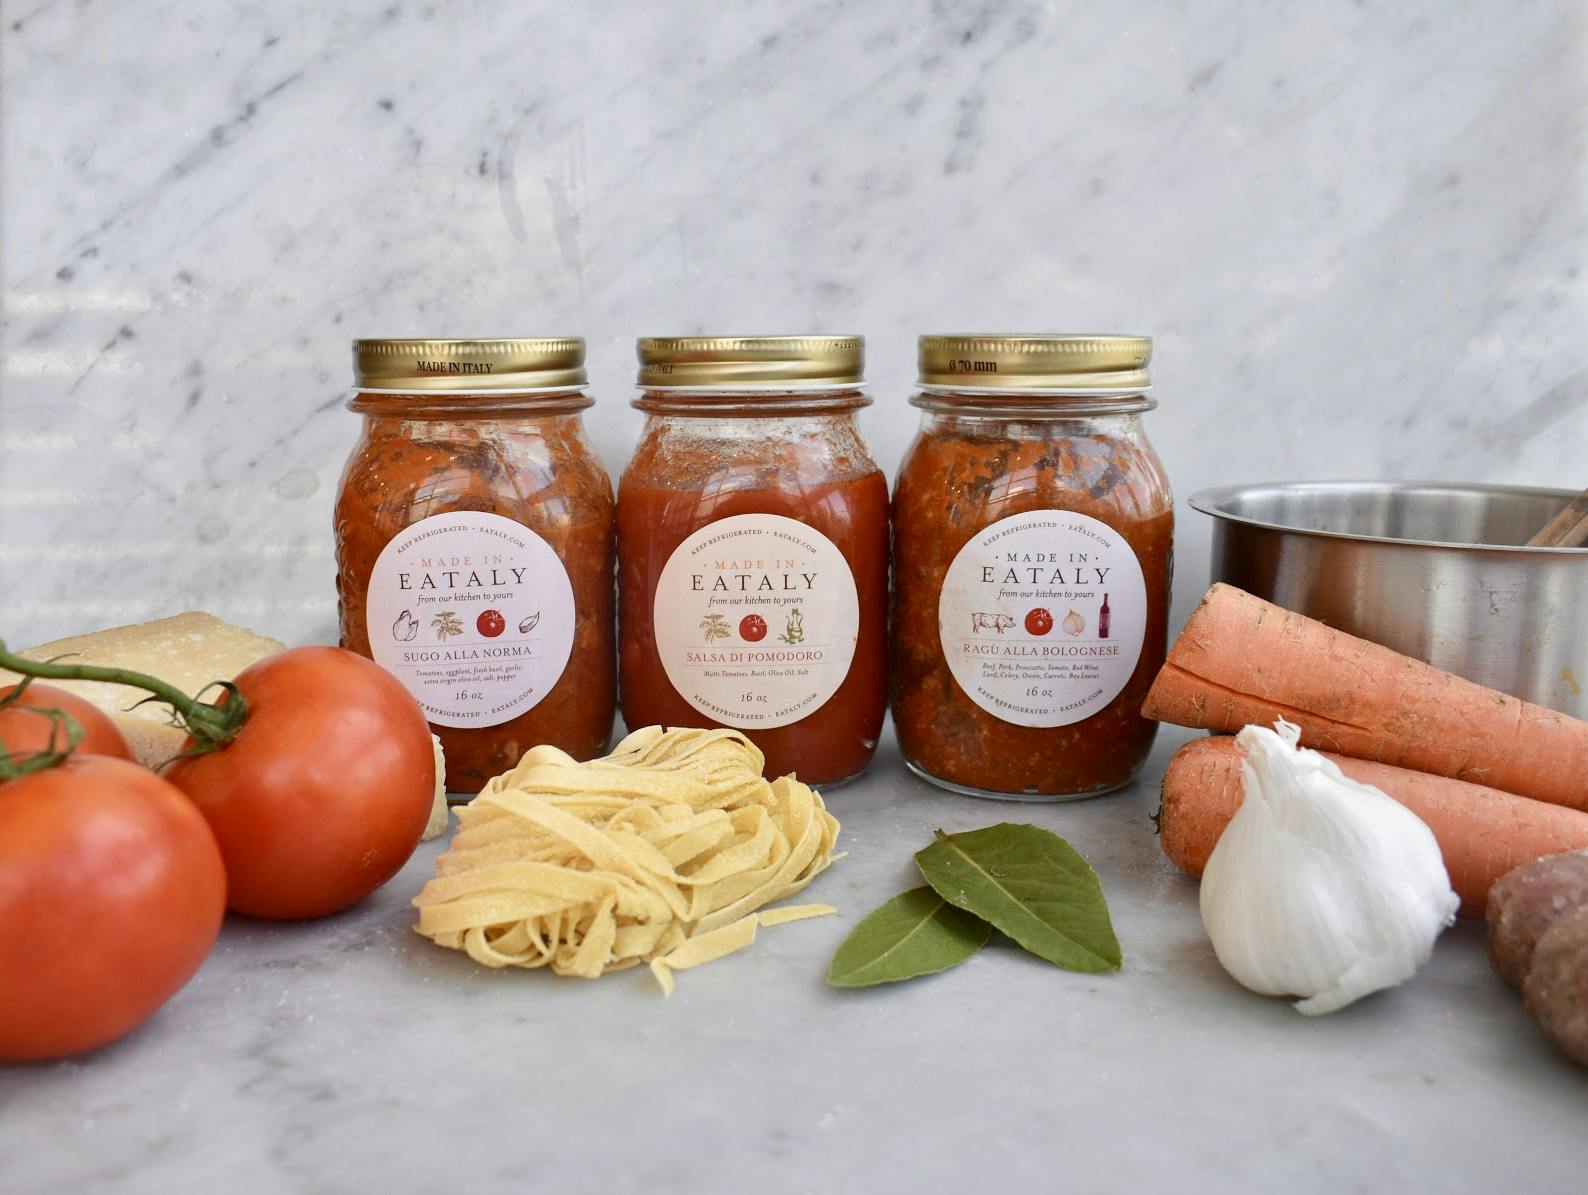 Mutti launches new pasta sauces in the US - Italianfood.net